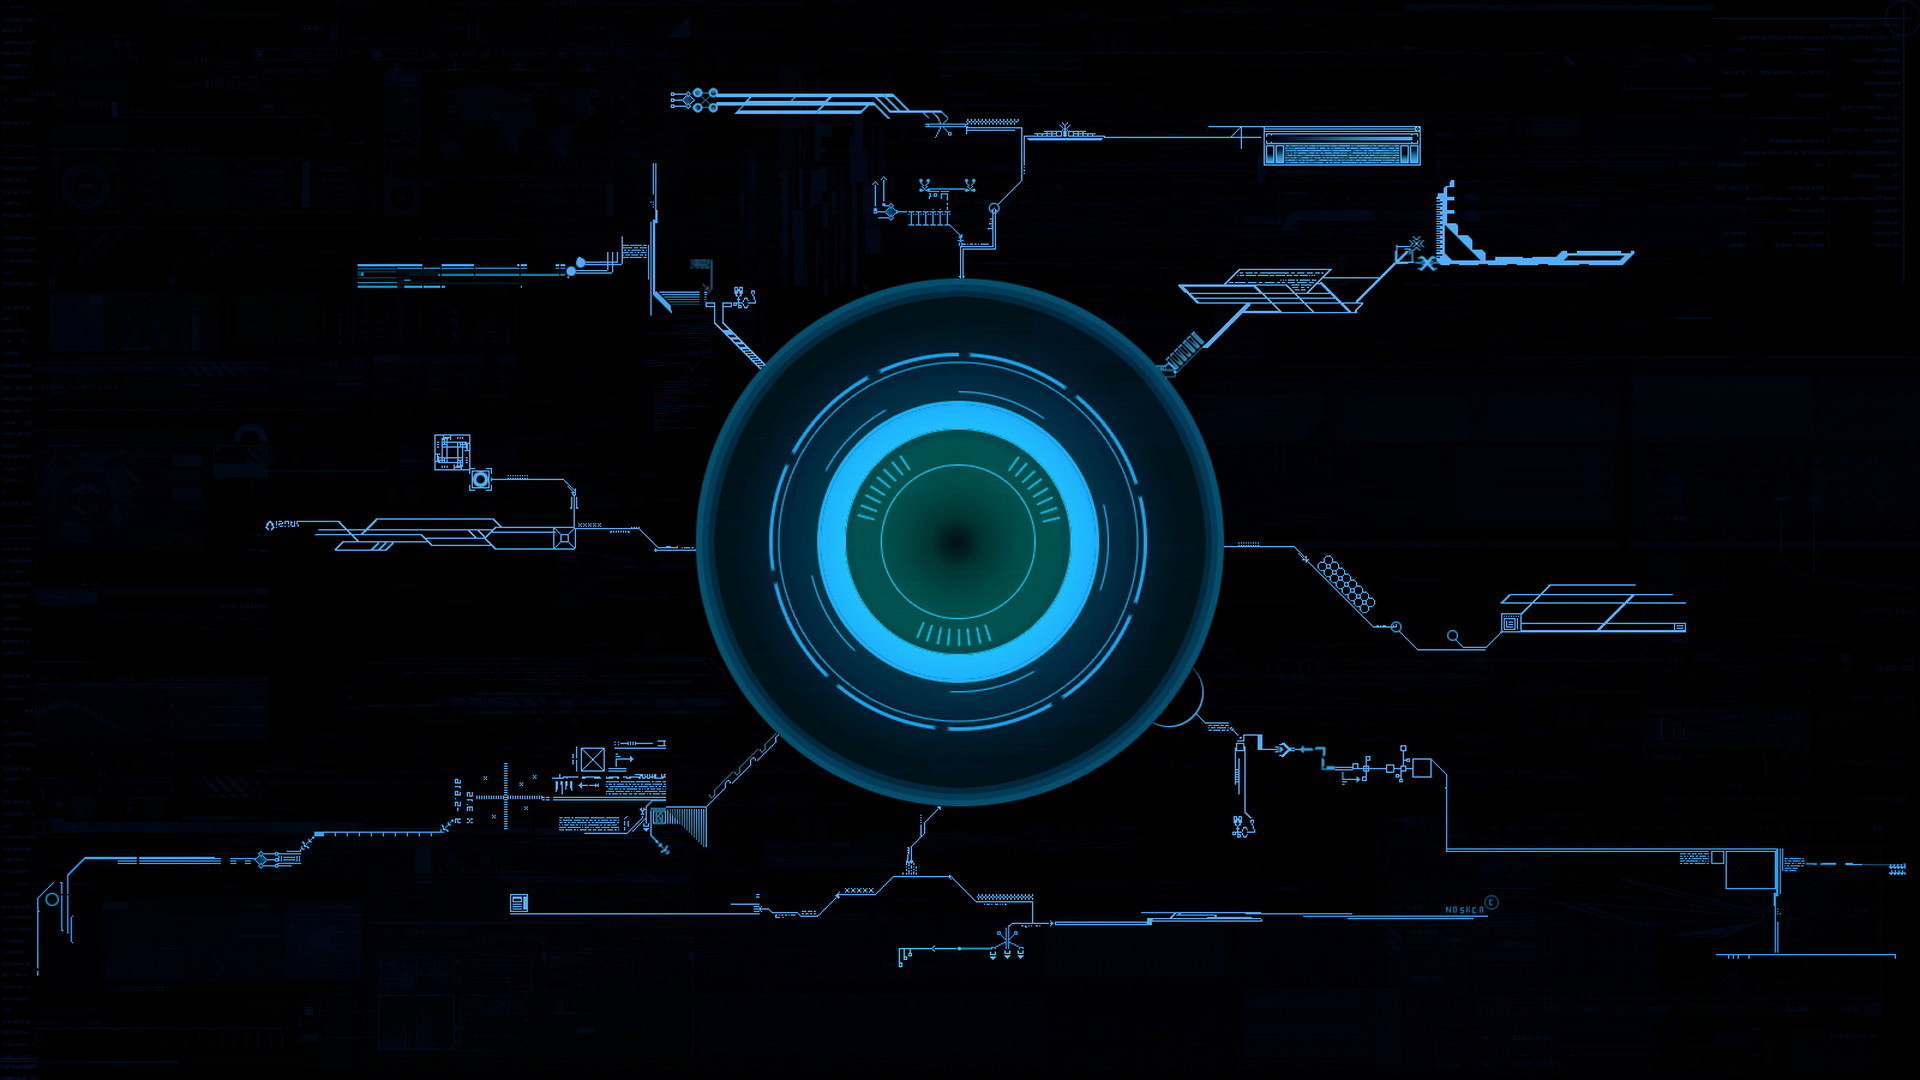 Jarvis, Possibility of Jarvis, Huawei ecosystem, Queda muy lejos, 1920x1080 Full HD Desktop